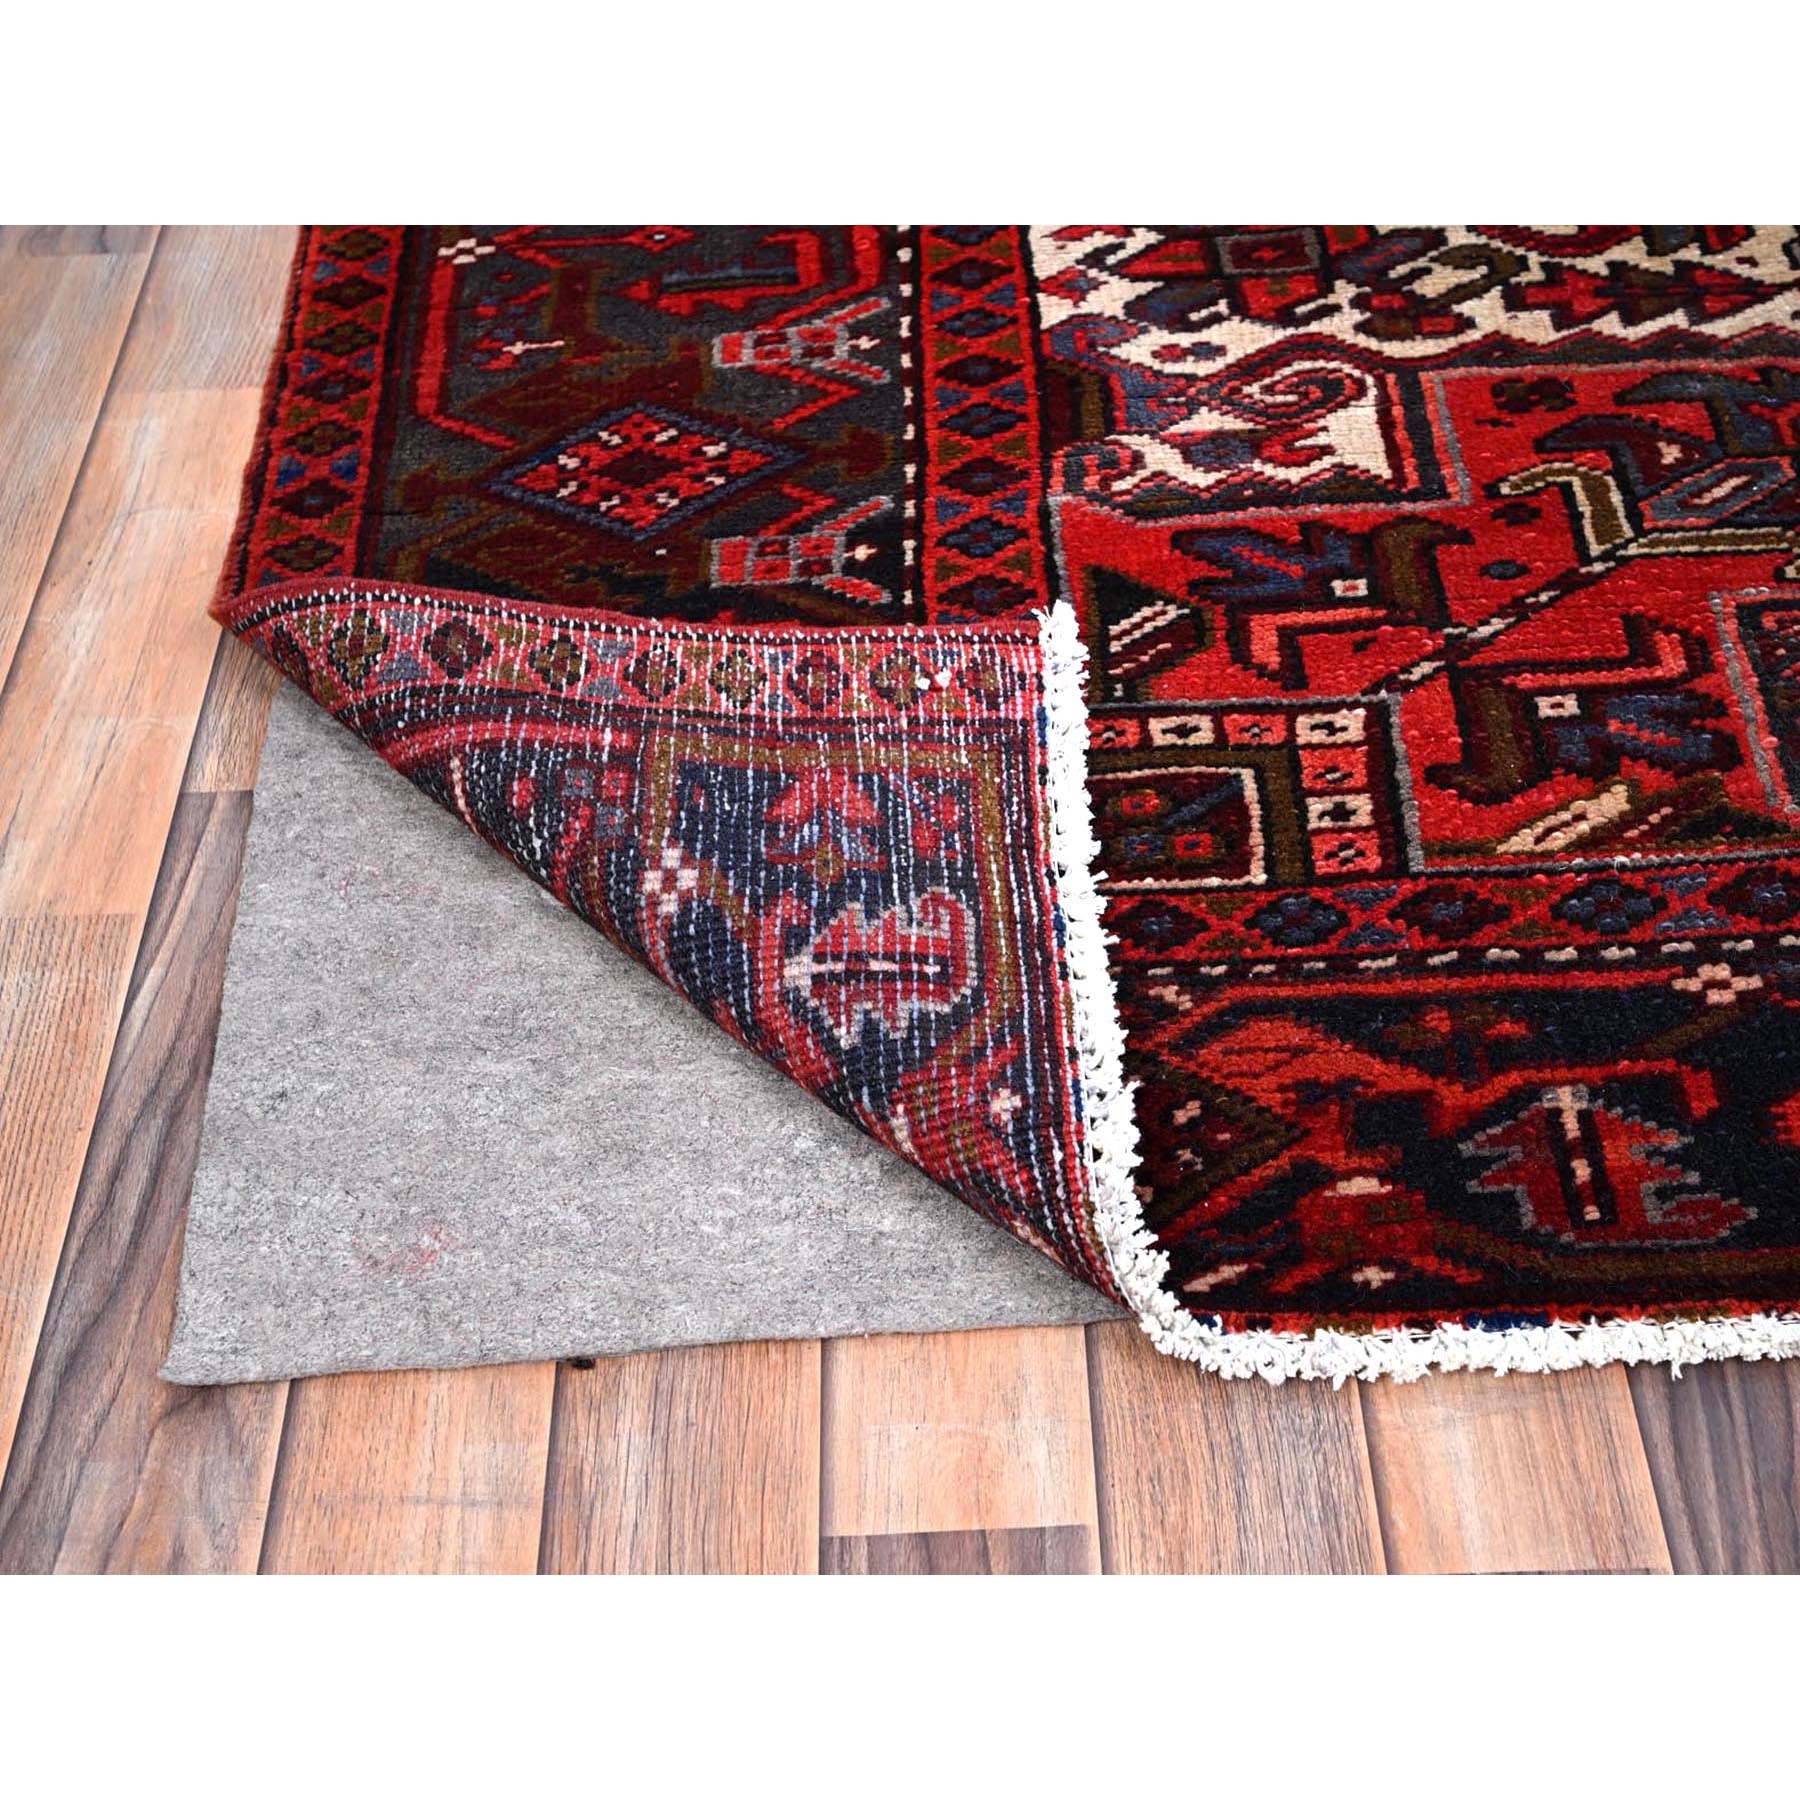 8'2"x11'3" Crimson Red, Good Condition, Distressed Feel, Evenly Worn, Pure Wool, Hand Woven, Semi Antique Persian Heriz with Tribal Ambience, Oriental Rug 